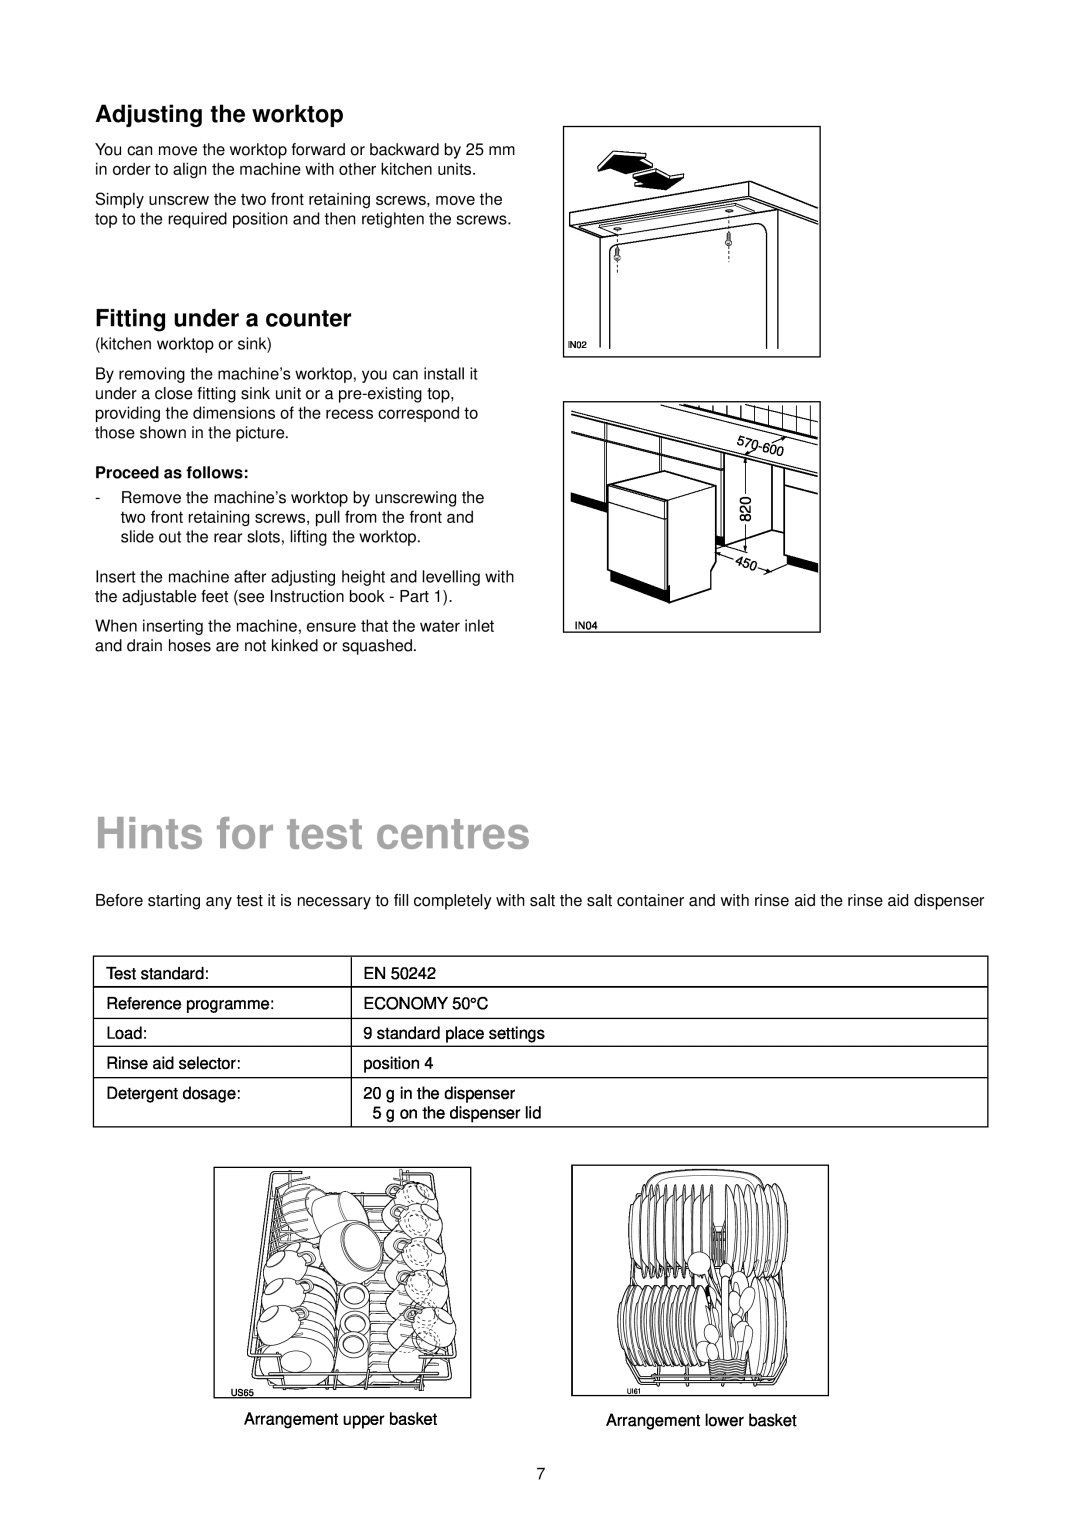 Zanussi DA 4342 manual Hints for test centres, Adjusting the worktop, Fitting under a counter, Proceed as follows 